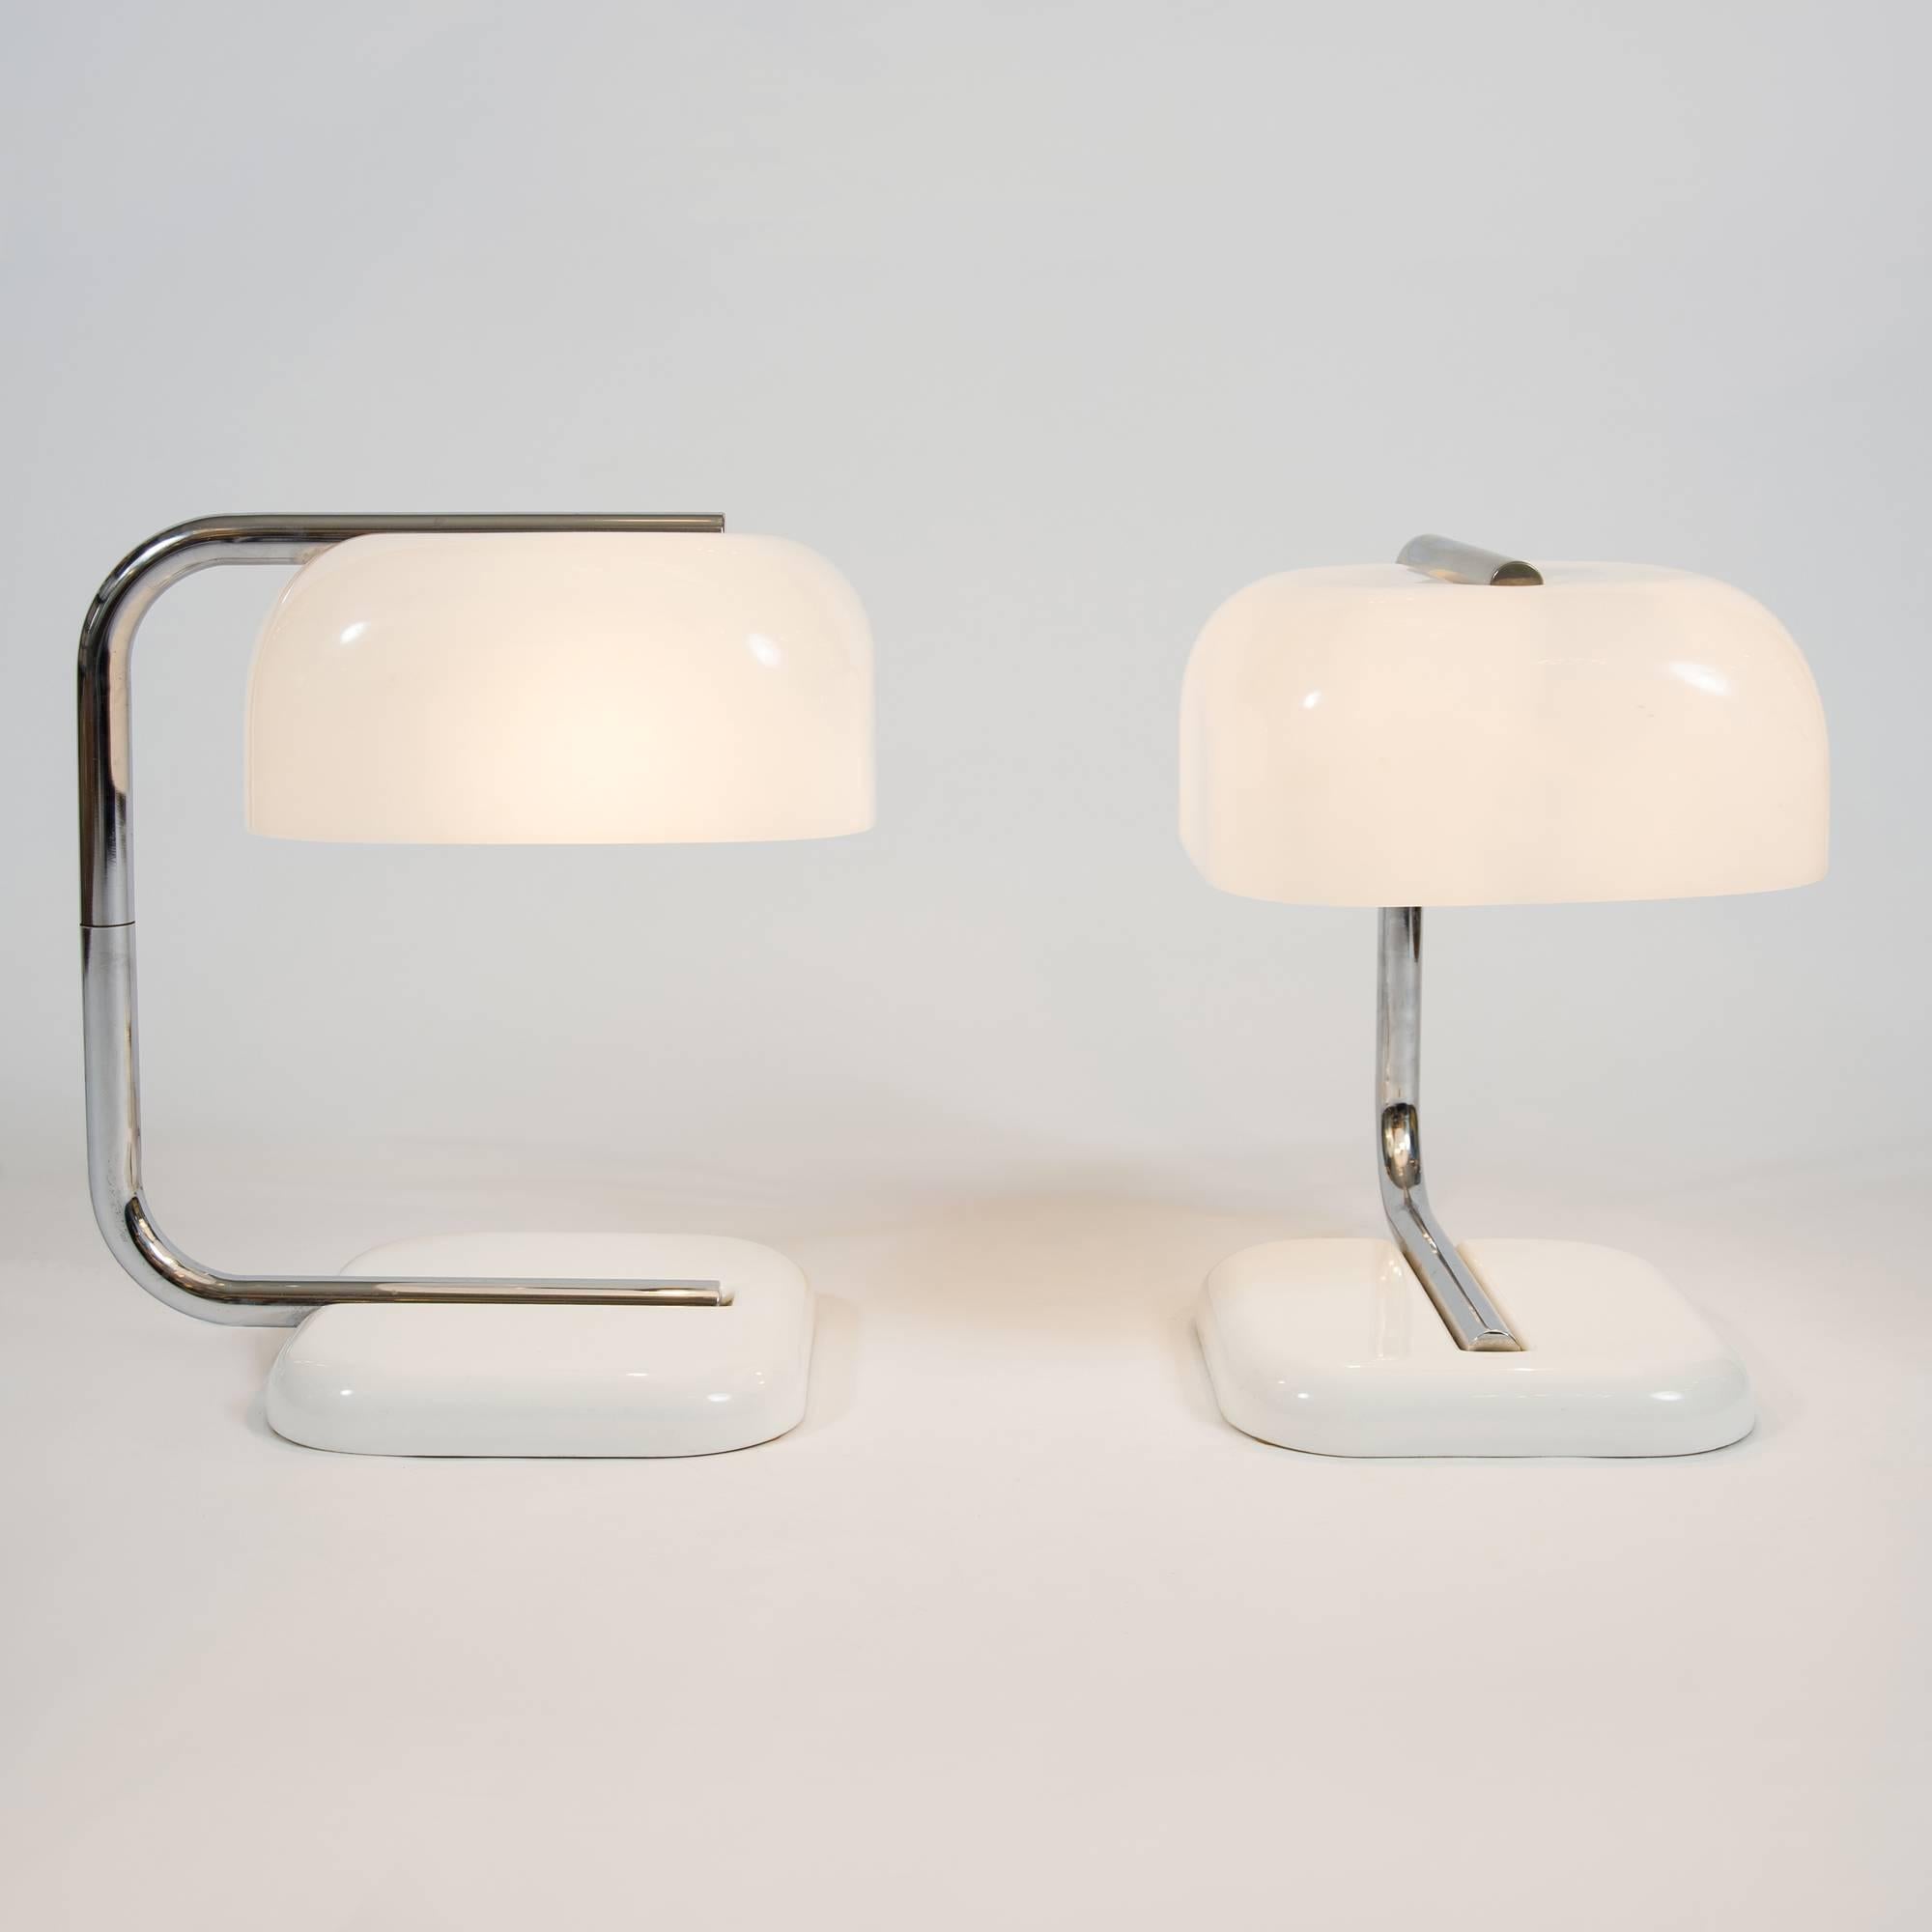 Substantial pair of 1950s Italian desk lamps, each with square white metal base, chrome curved arm and white acrylic shade.